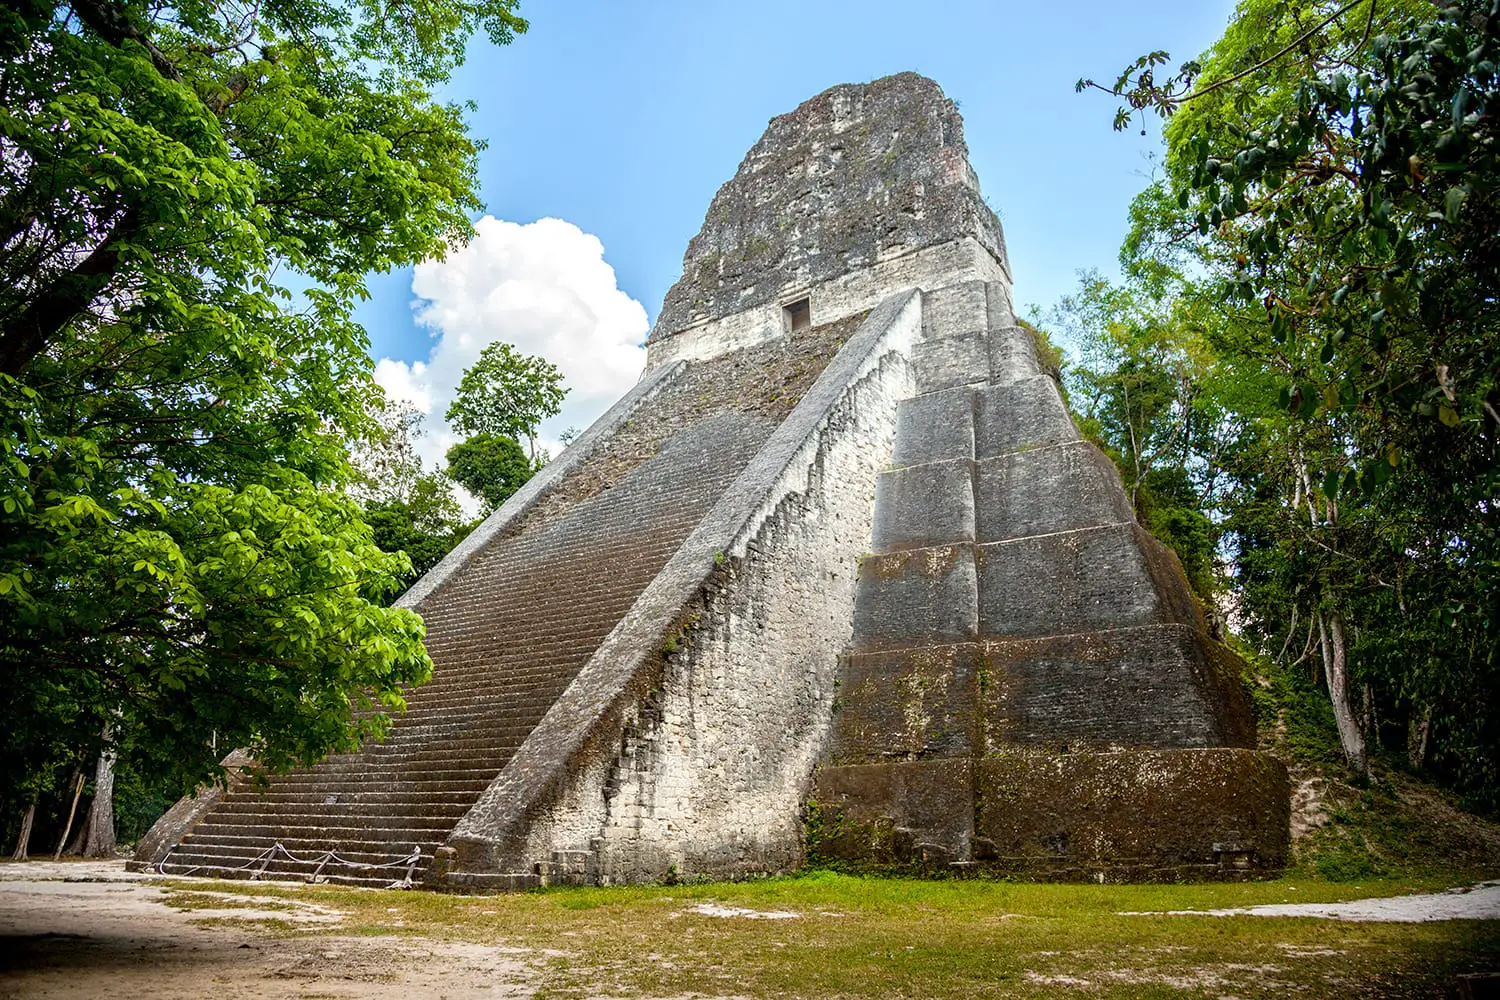 Temple V stands south of the Central Acropolis and is a mortuary pyramid. It has been dated AD 700, in the Late Classic period of the Mayas. is the second tallest structure in Tikal, Guatemala.